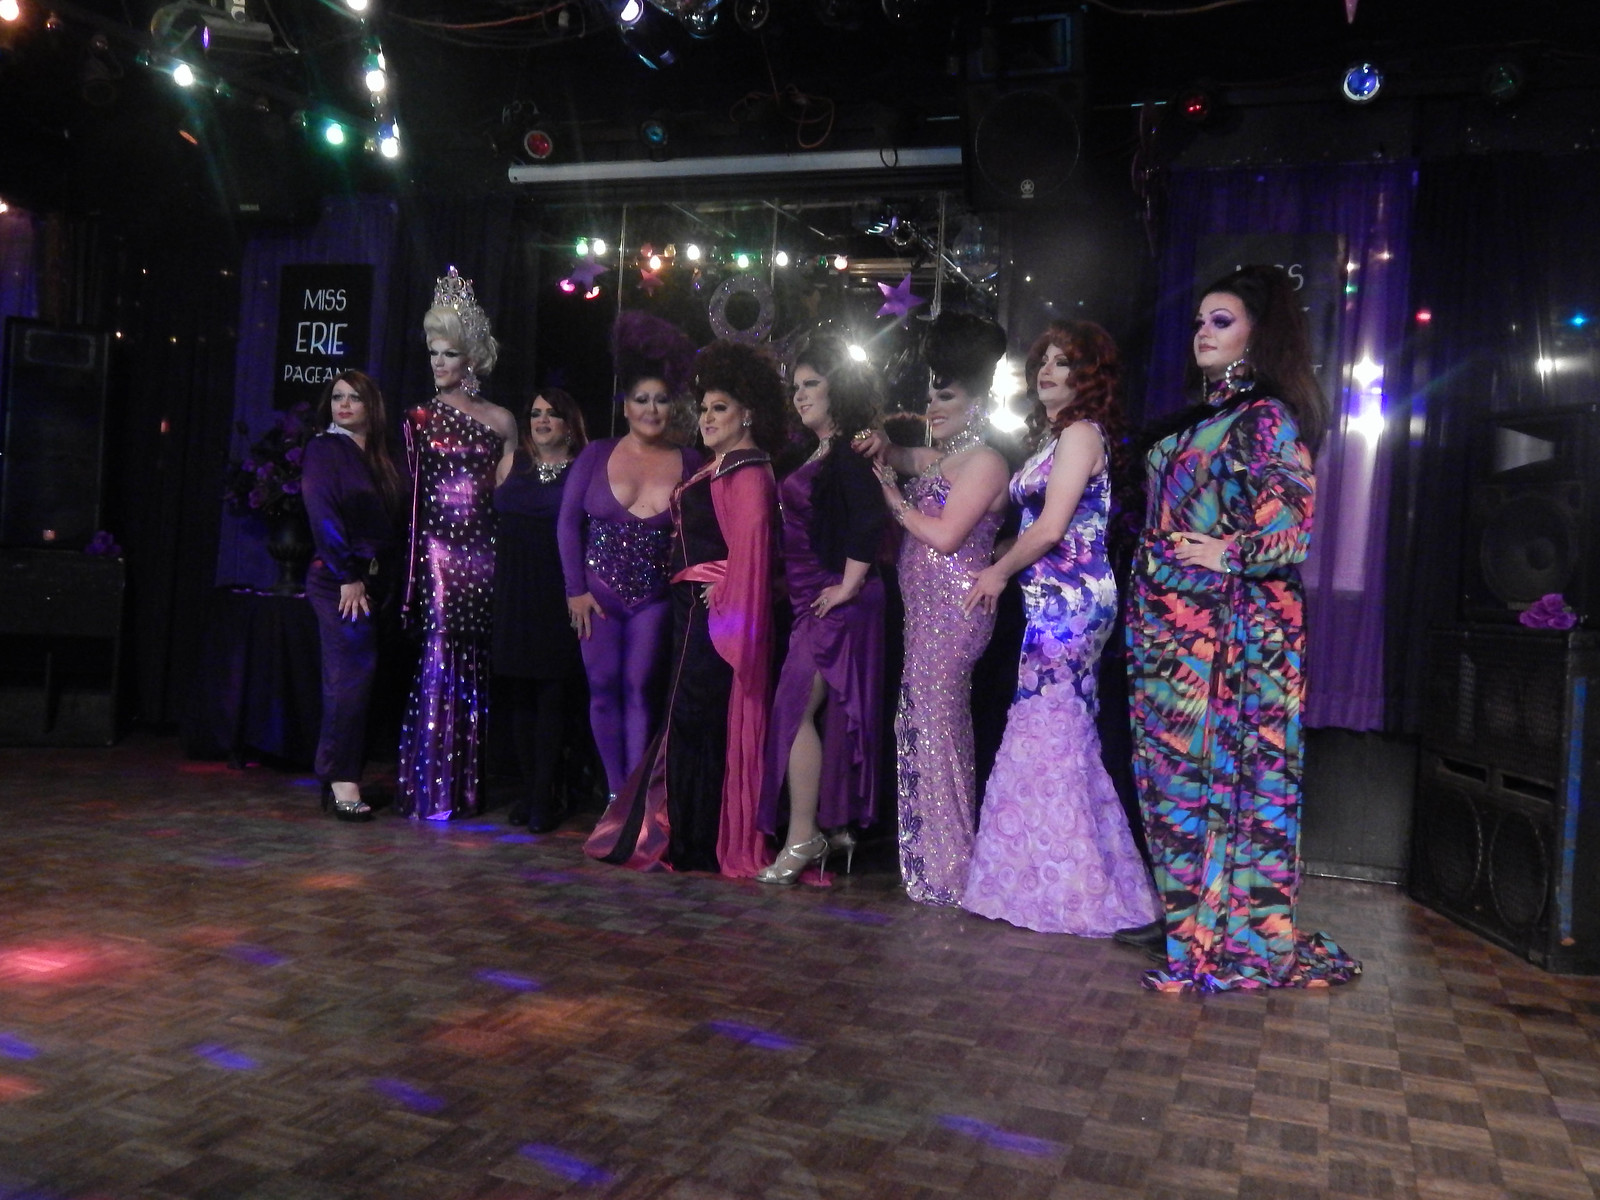 Former Miss Erie Title holders , Mistress Vanitay, Veronica Lace, Buffy  Lynn Hayes, Danyel Vasquez; Michelle Michaels, Misty Michaels Kall, Valerie Valentino, Angelica Redd and Rhiannon Angelina